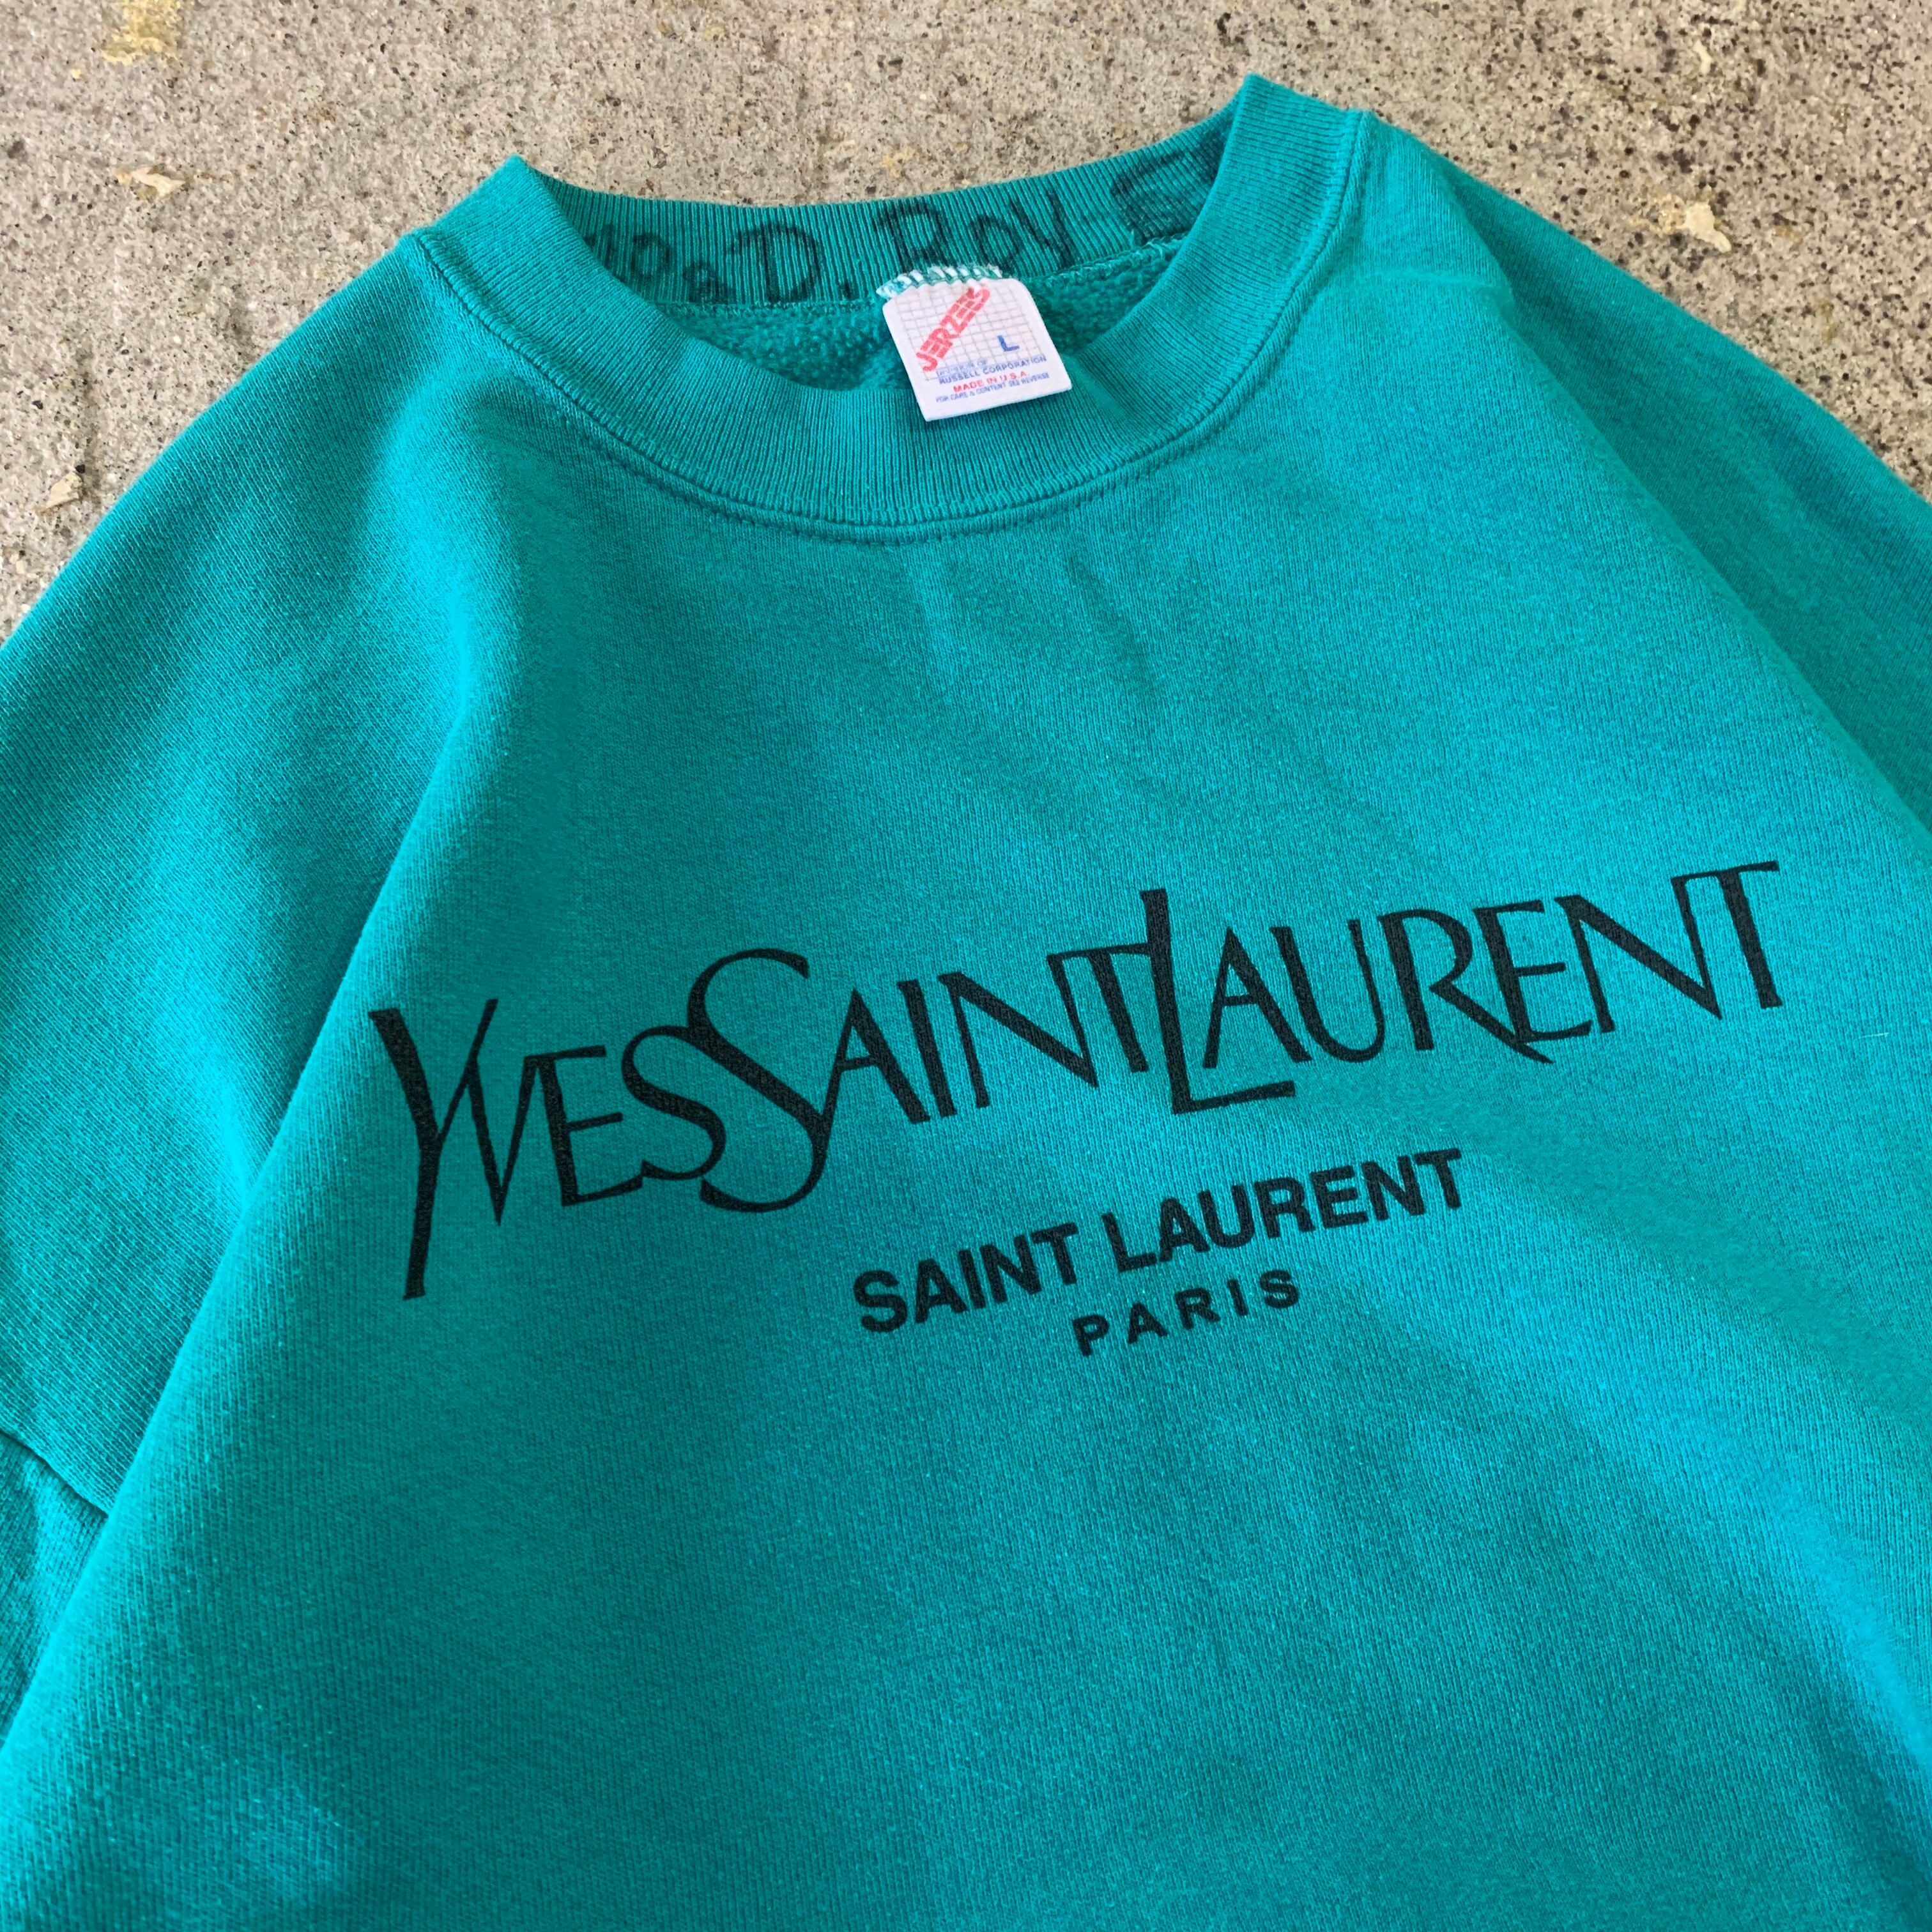 90s bootleg YEVS SAINT LAURENT sweat | What’z up powered by BASE